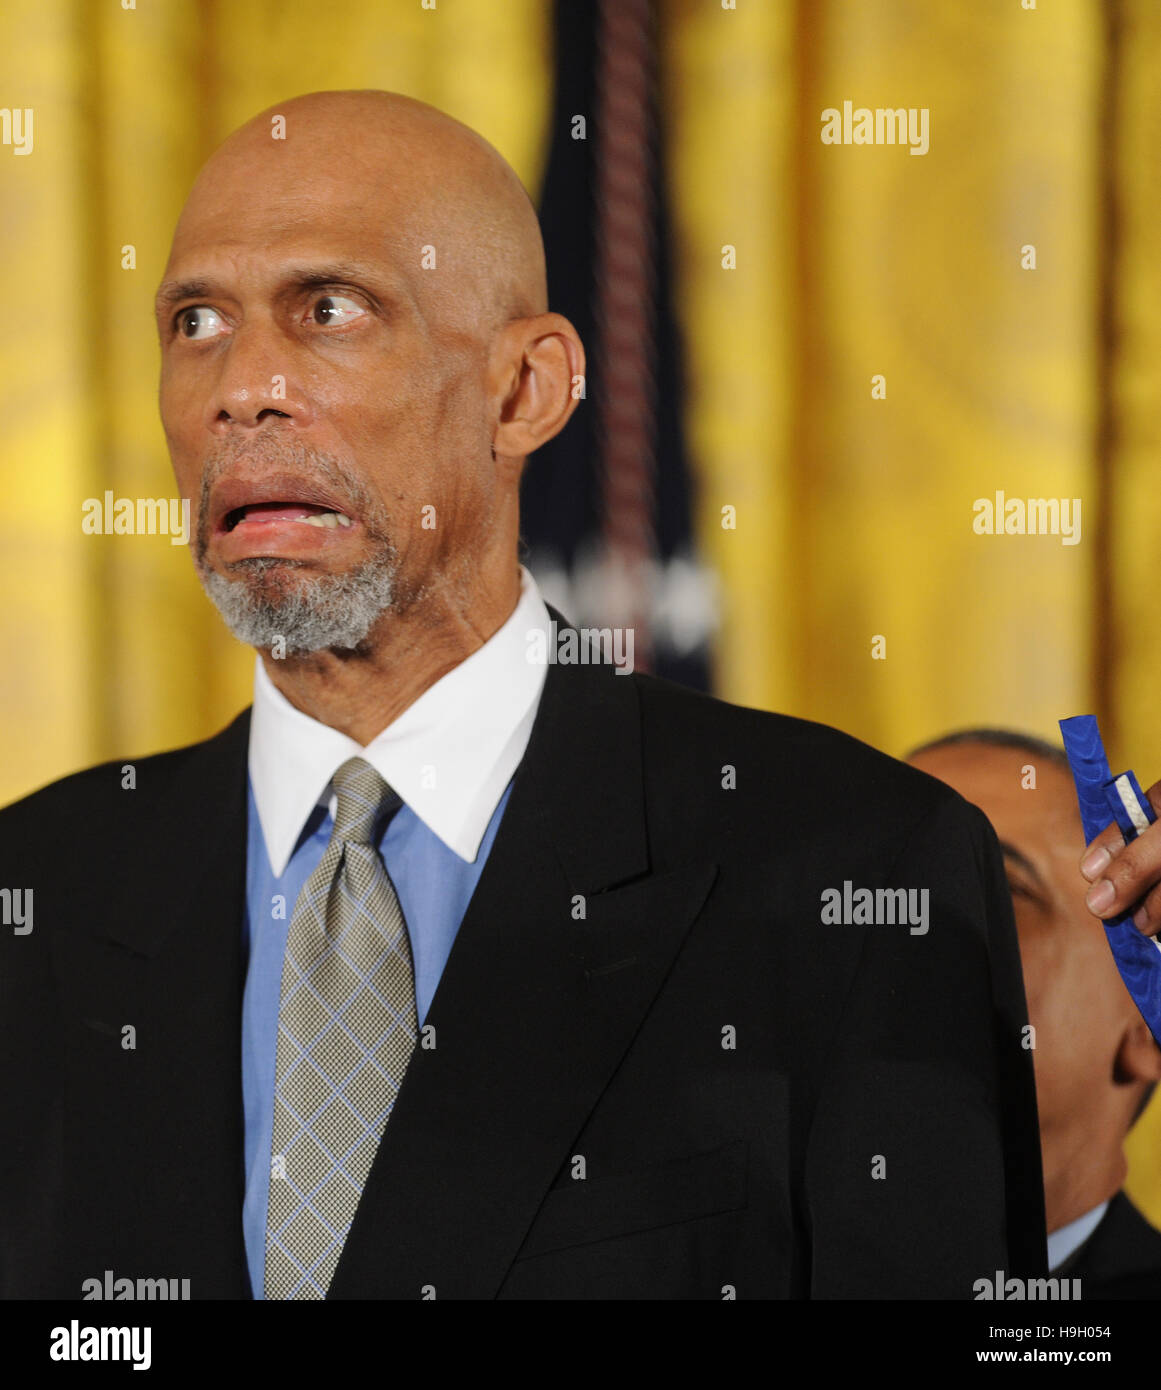 Washington, United States. 22nd Nov, 2016.  Kareem Abdul-Jabbar reacts as U.S. President Barack Obama reaches up to present him with the Presidential Medal of Freedom in a ceremony in the East Room of the White House on November 22, 2016. The Presidential Medal of Freedom is the highest honor for civilians in the United States. Credit:  Paul Hennessy/Alamy Live News Stock Photo